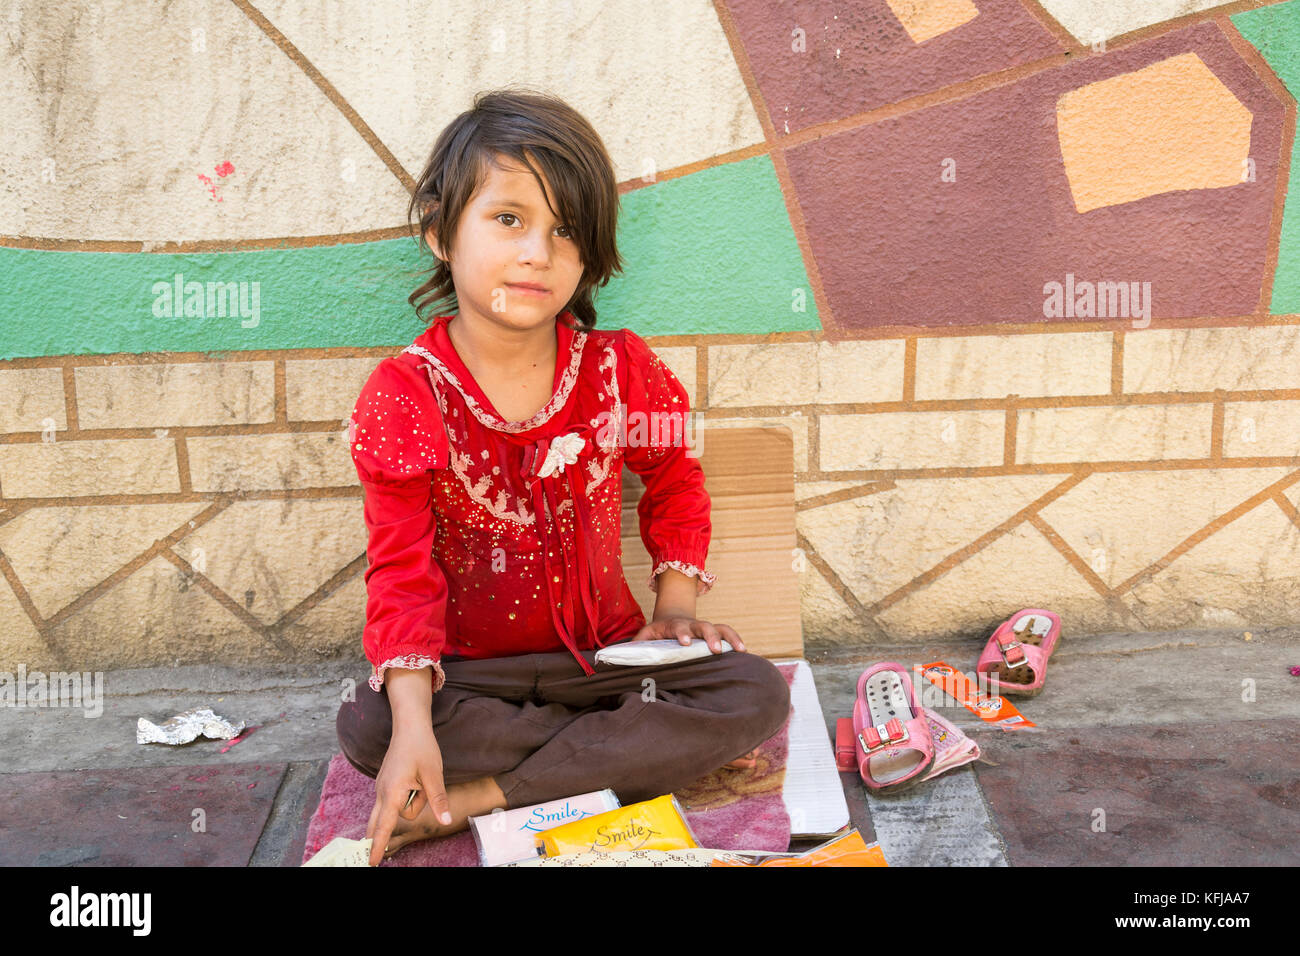 Tehran, IRAN - August 16, 2017 A little girl selling small tissue packages at street pavement Stock Photo